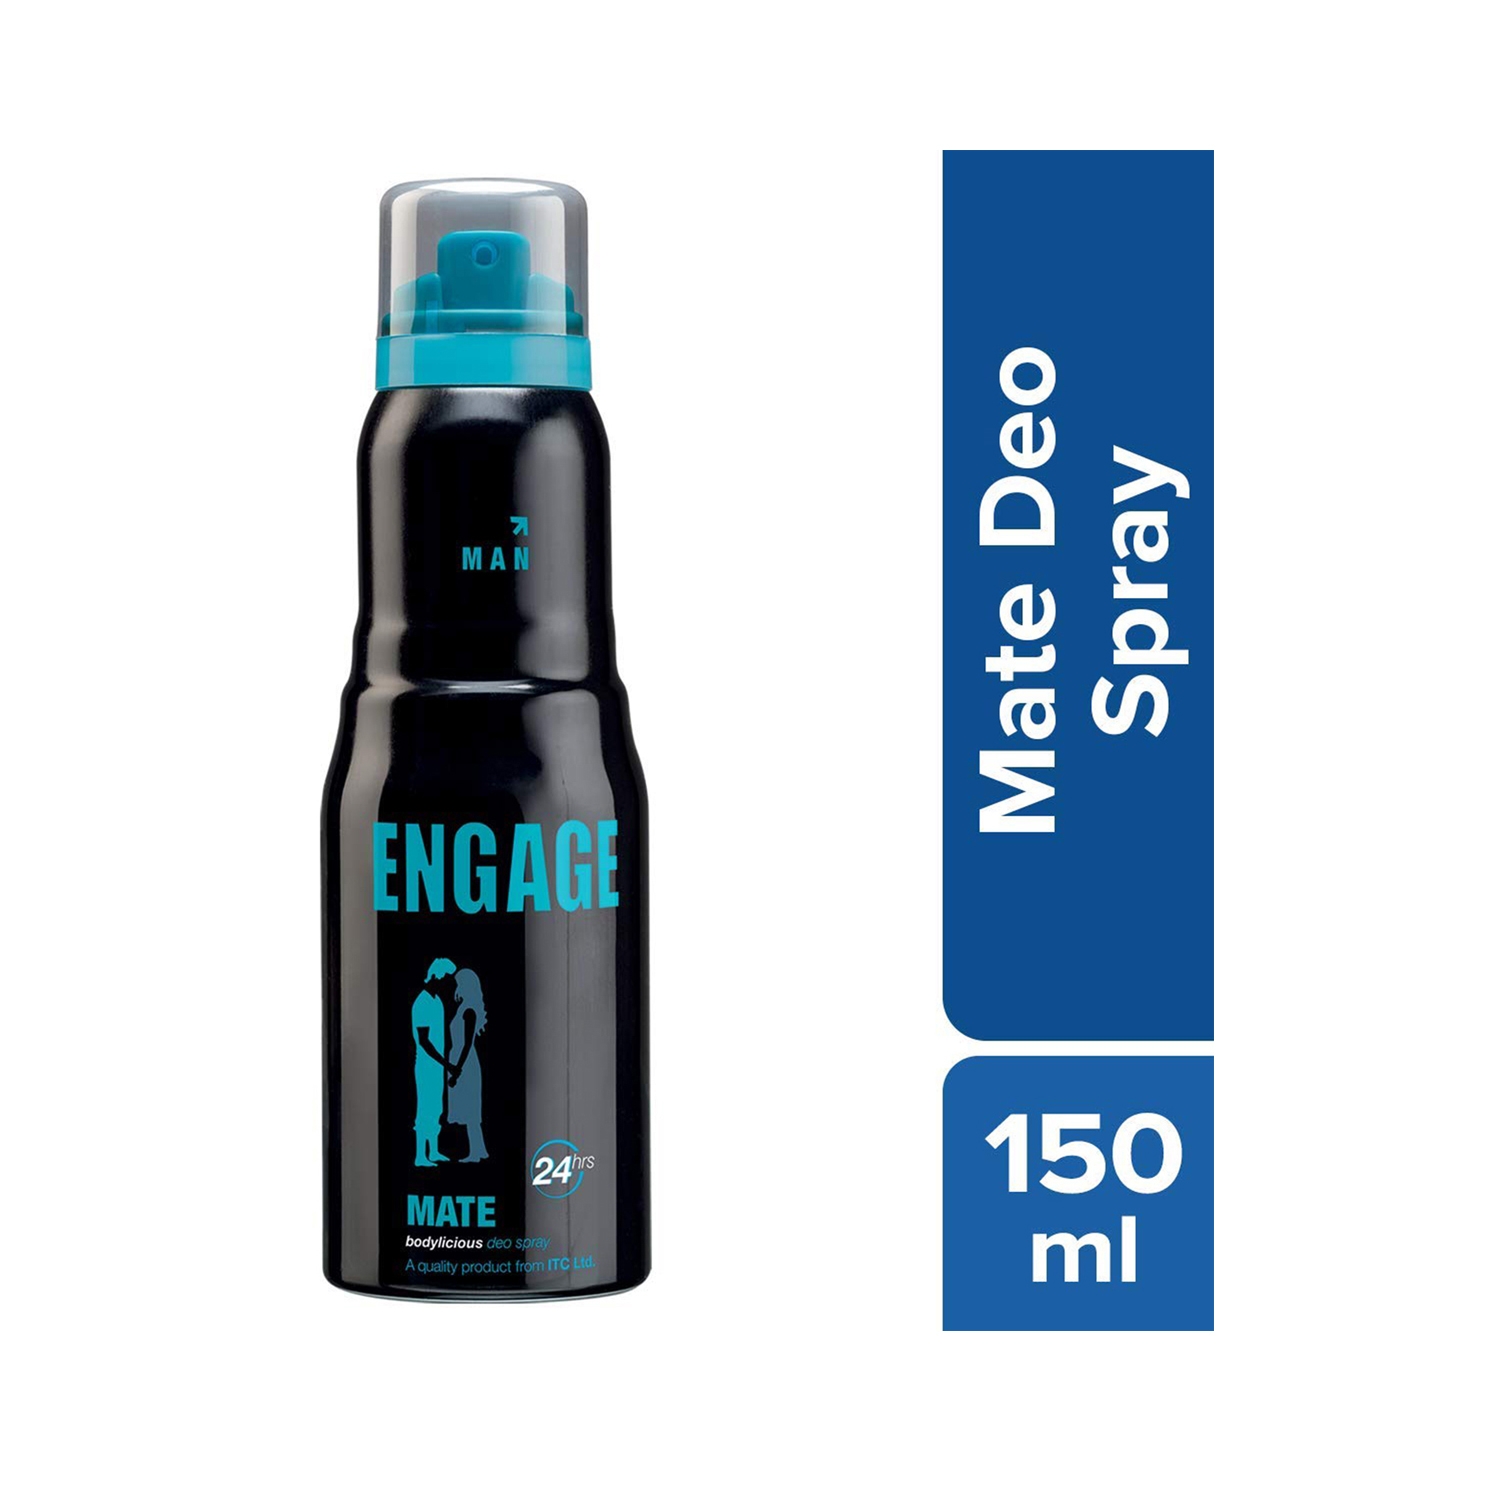 Engage | Engage Mate Deodorant Spray For Man (150ml)